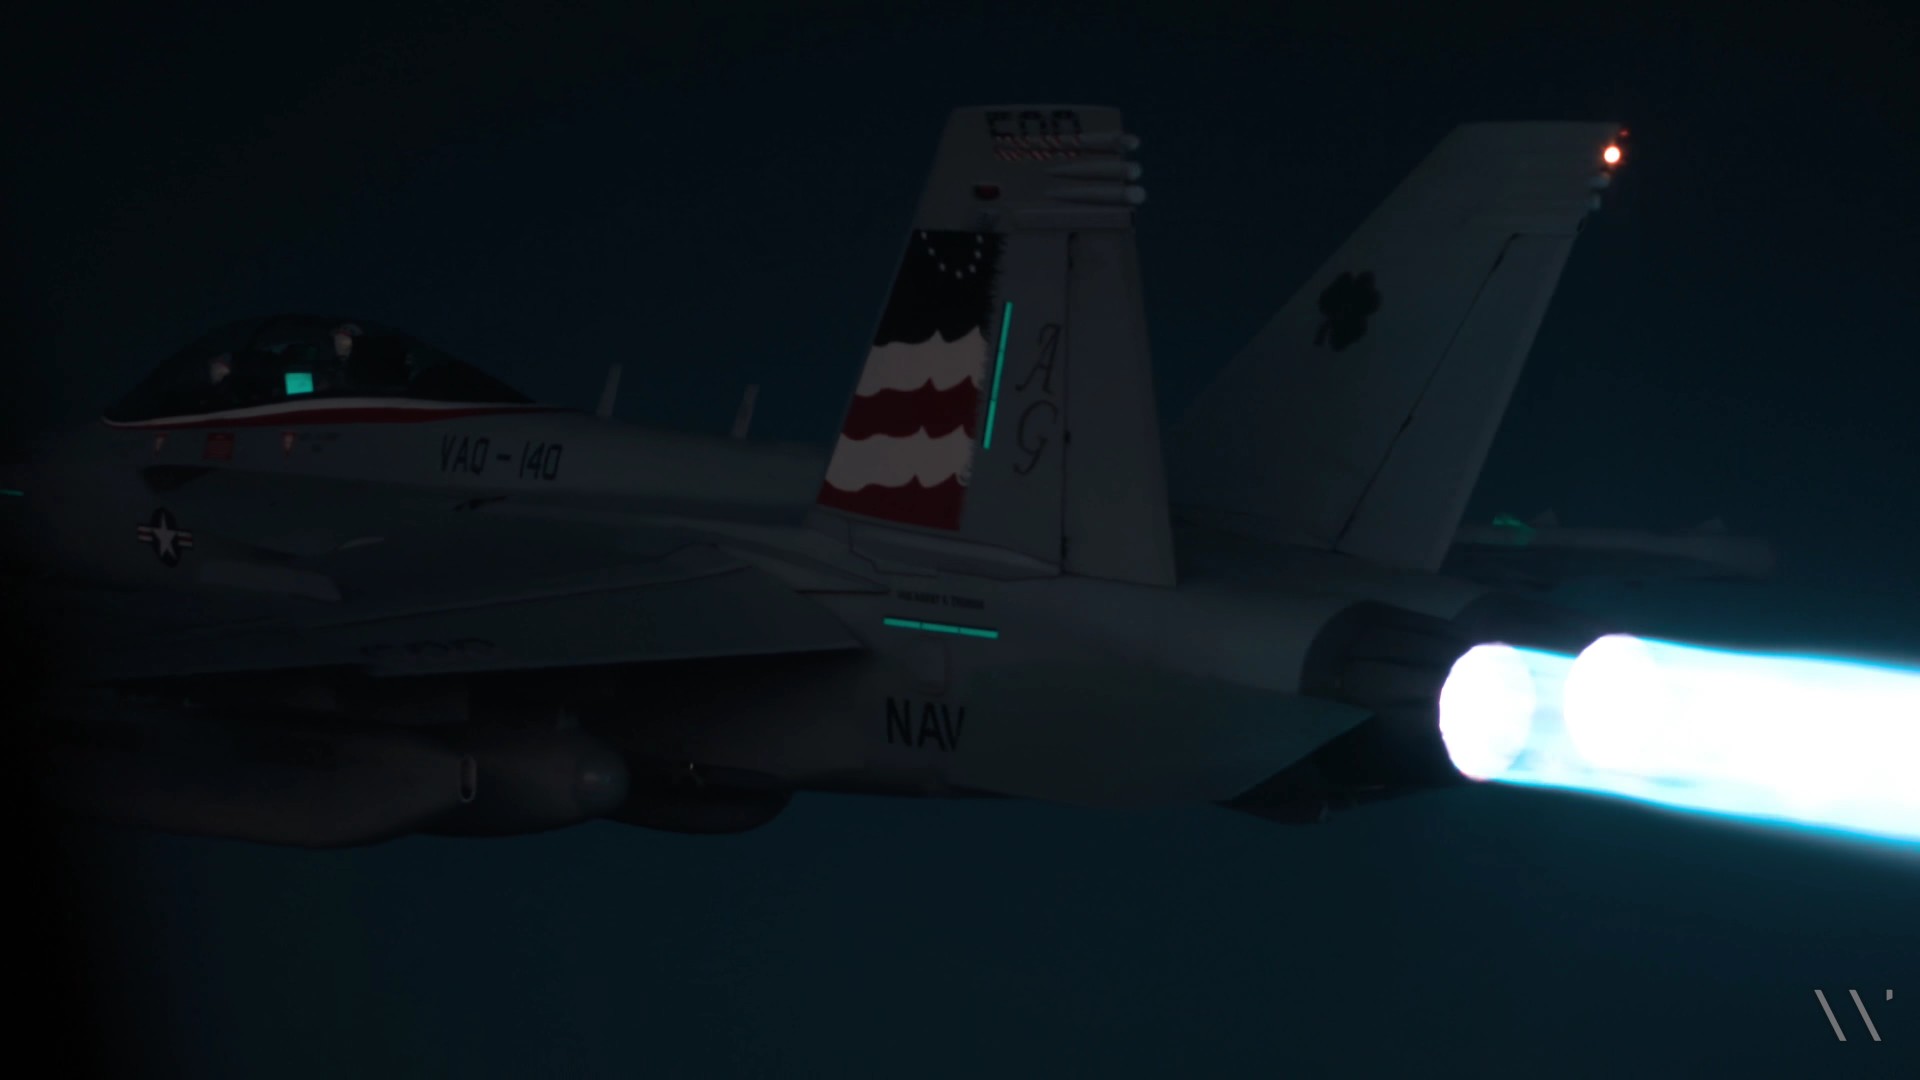 afterburner, USN VAQ 140 504 Patriots, United States Navy, Night, USS Harry S. Truman, EA 18G, 7TH Carrier Air Wing, Jet fighter, Multirole fighter, Military Wallpaper